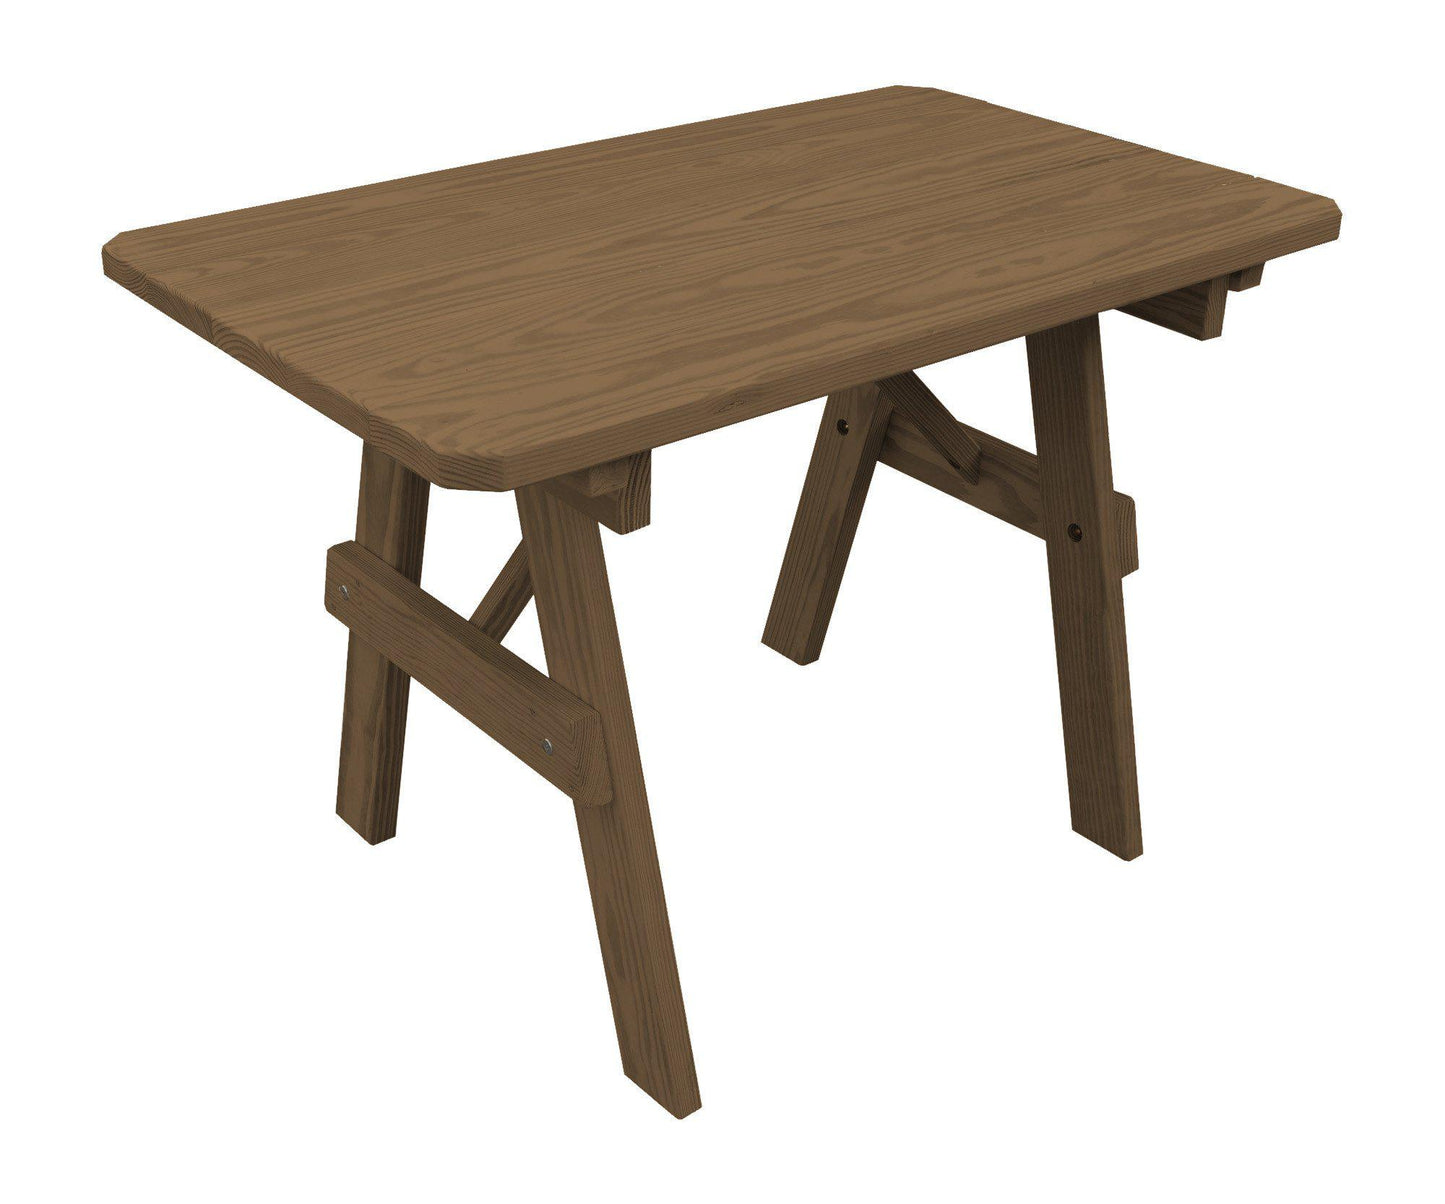 A&L Furniture Co. Pressure Treated Pine 4' Traditional Table Only - LEAD TIME TO SHIP 10 BUSINESS DAYS